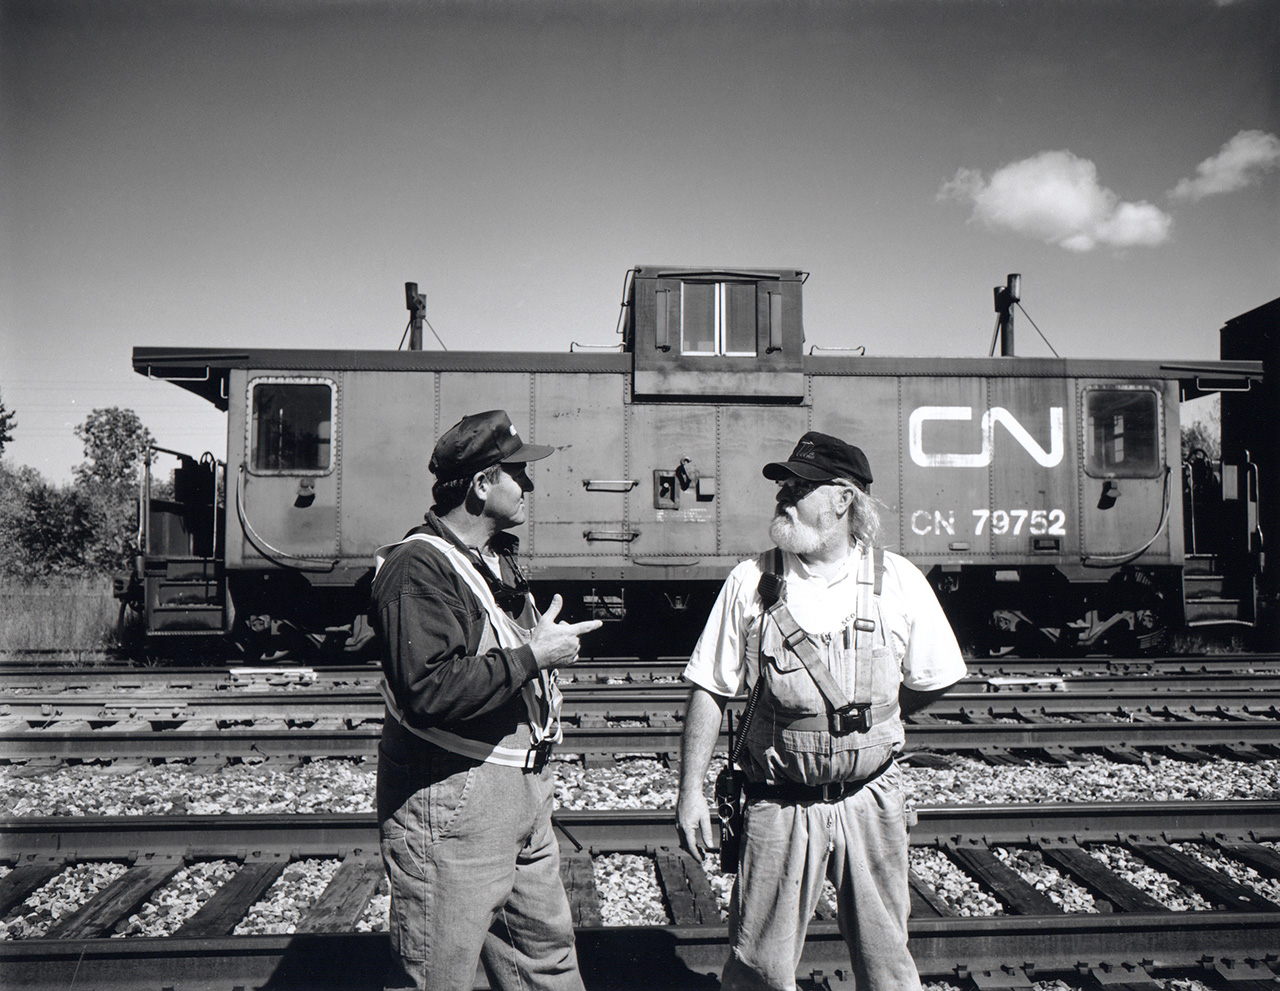 "This is one of the last vans on the system with an operating toilet".  The conductor and brakeman pause in Merrictton Yard the last day CN train 549 serviced St. Catherines and Thorold.  The Port Colborne Harbour Railway started up the next day.